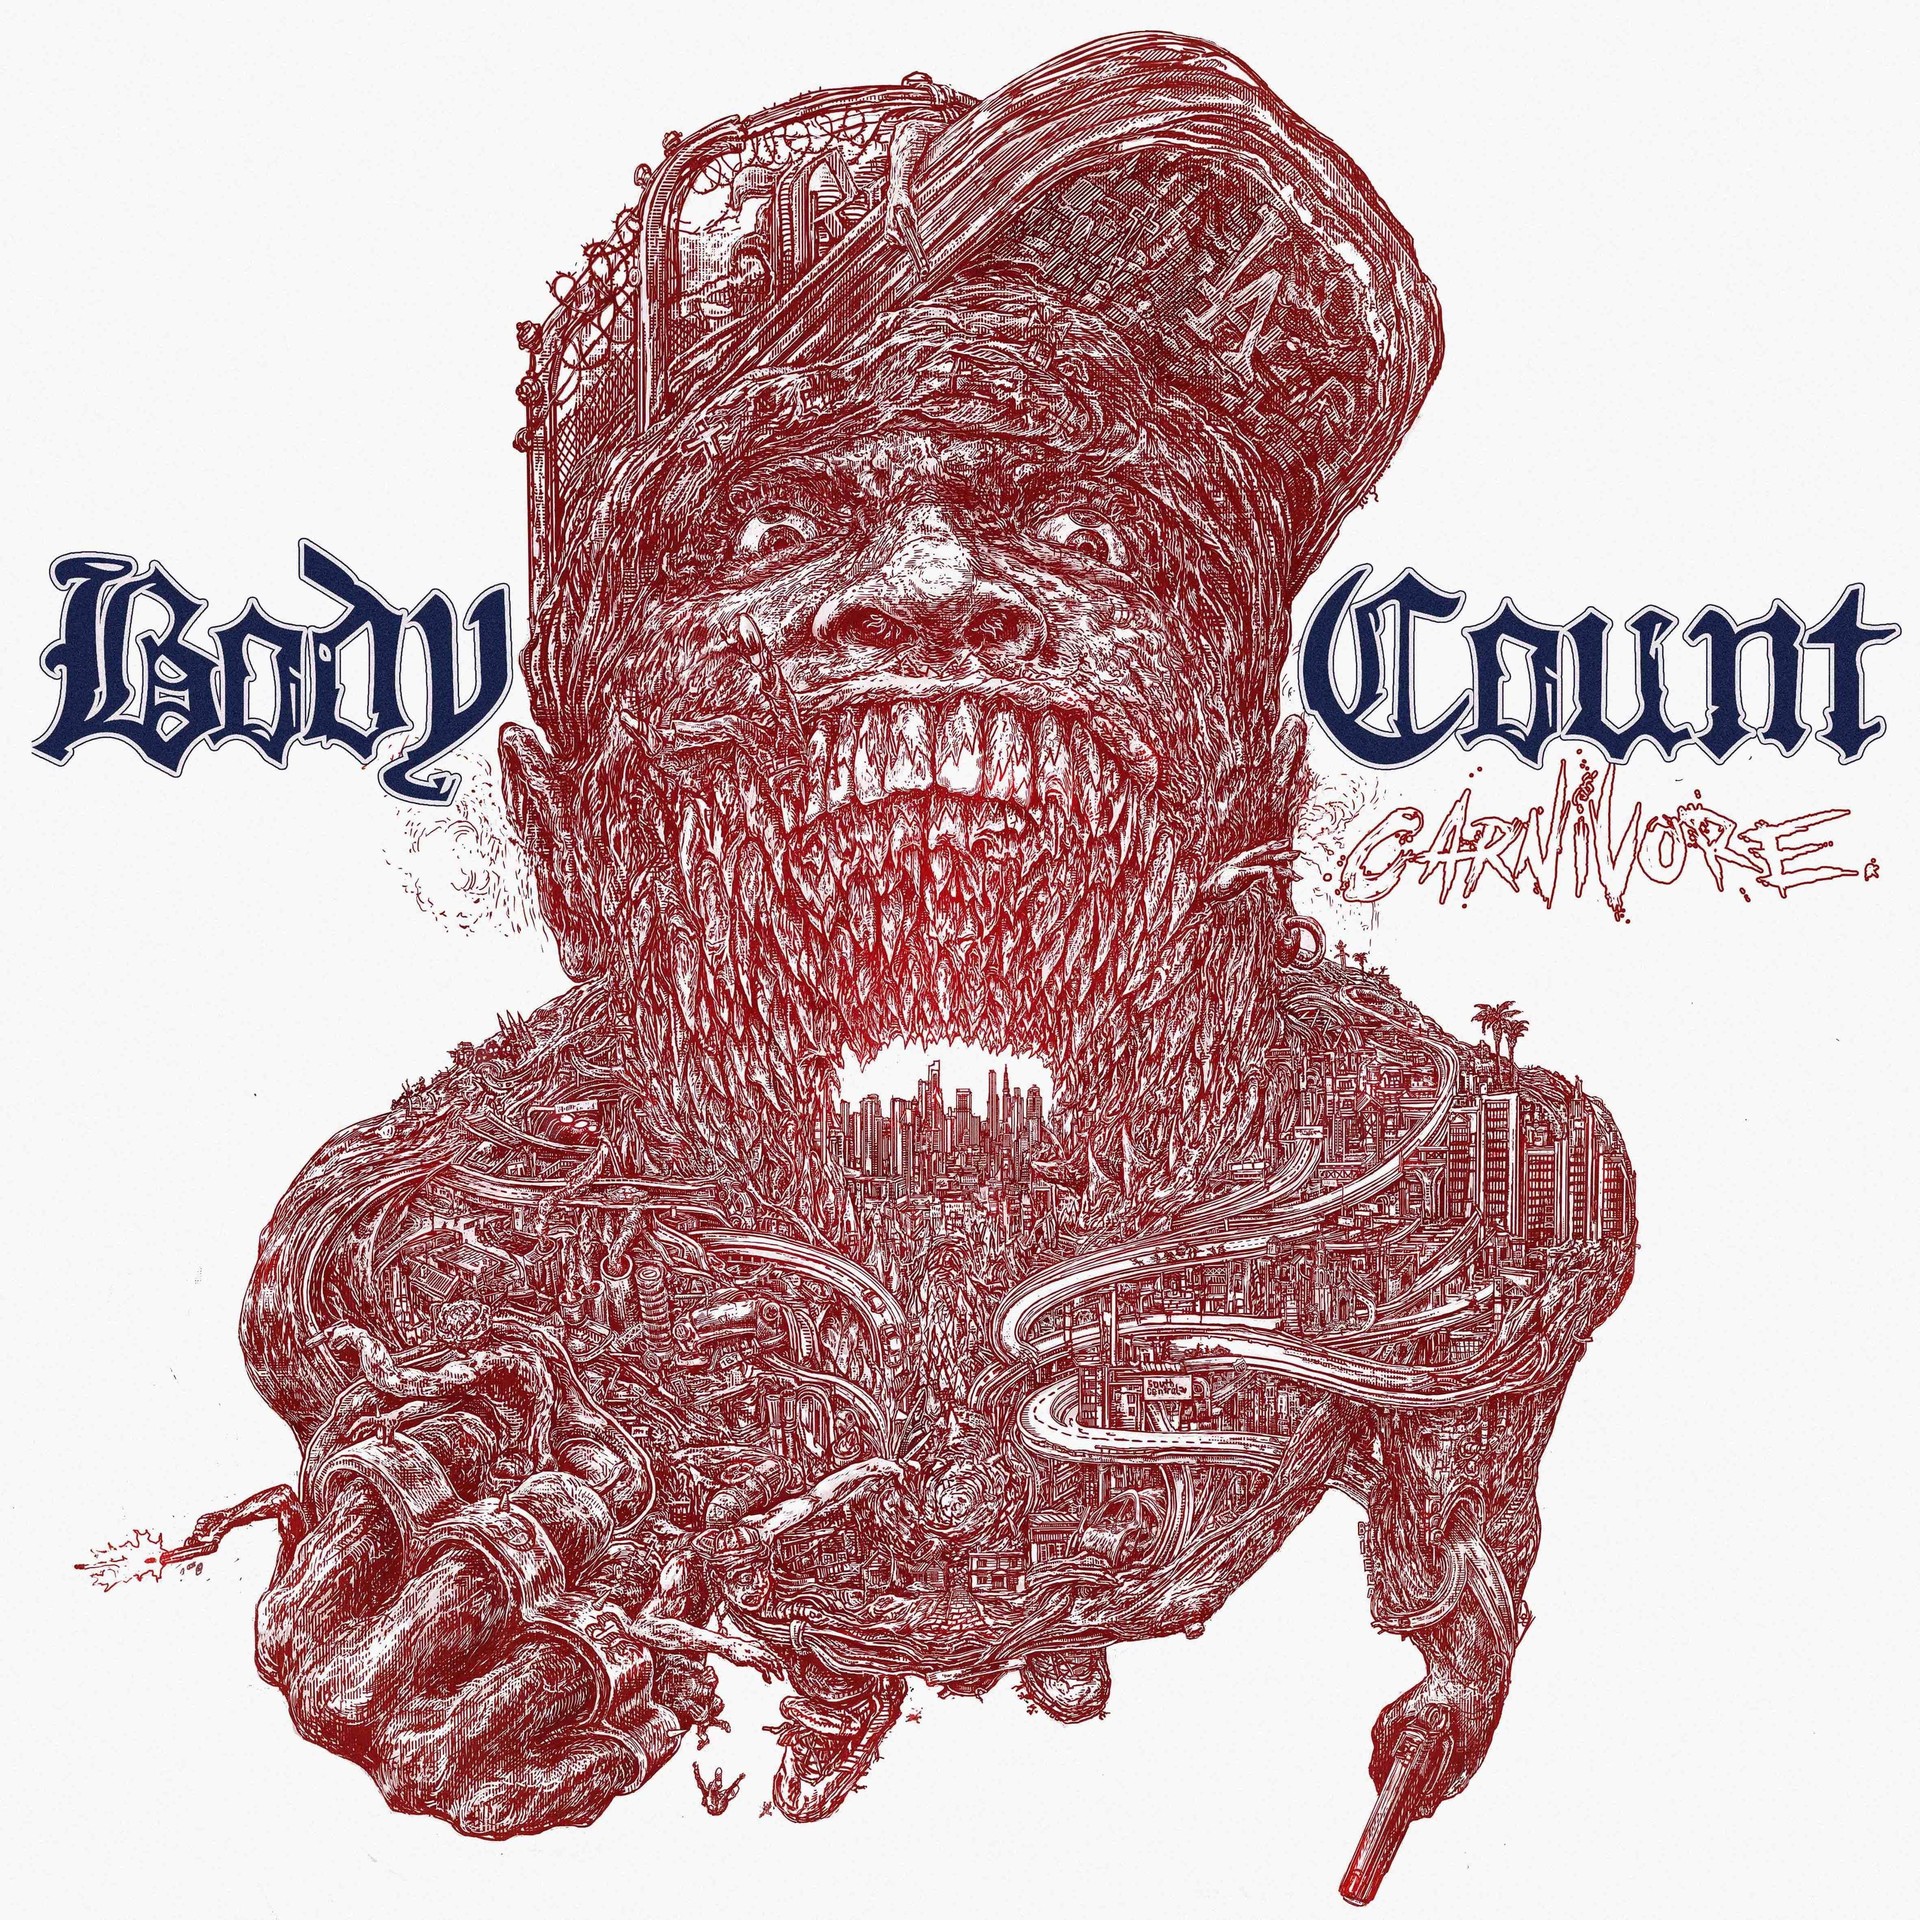 Body Count Debut Animated "Carnivore" Video; Reveal Album Cover ​   　 